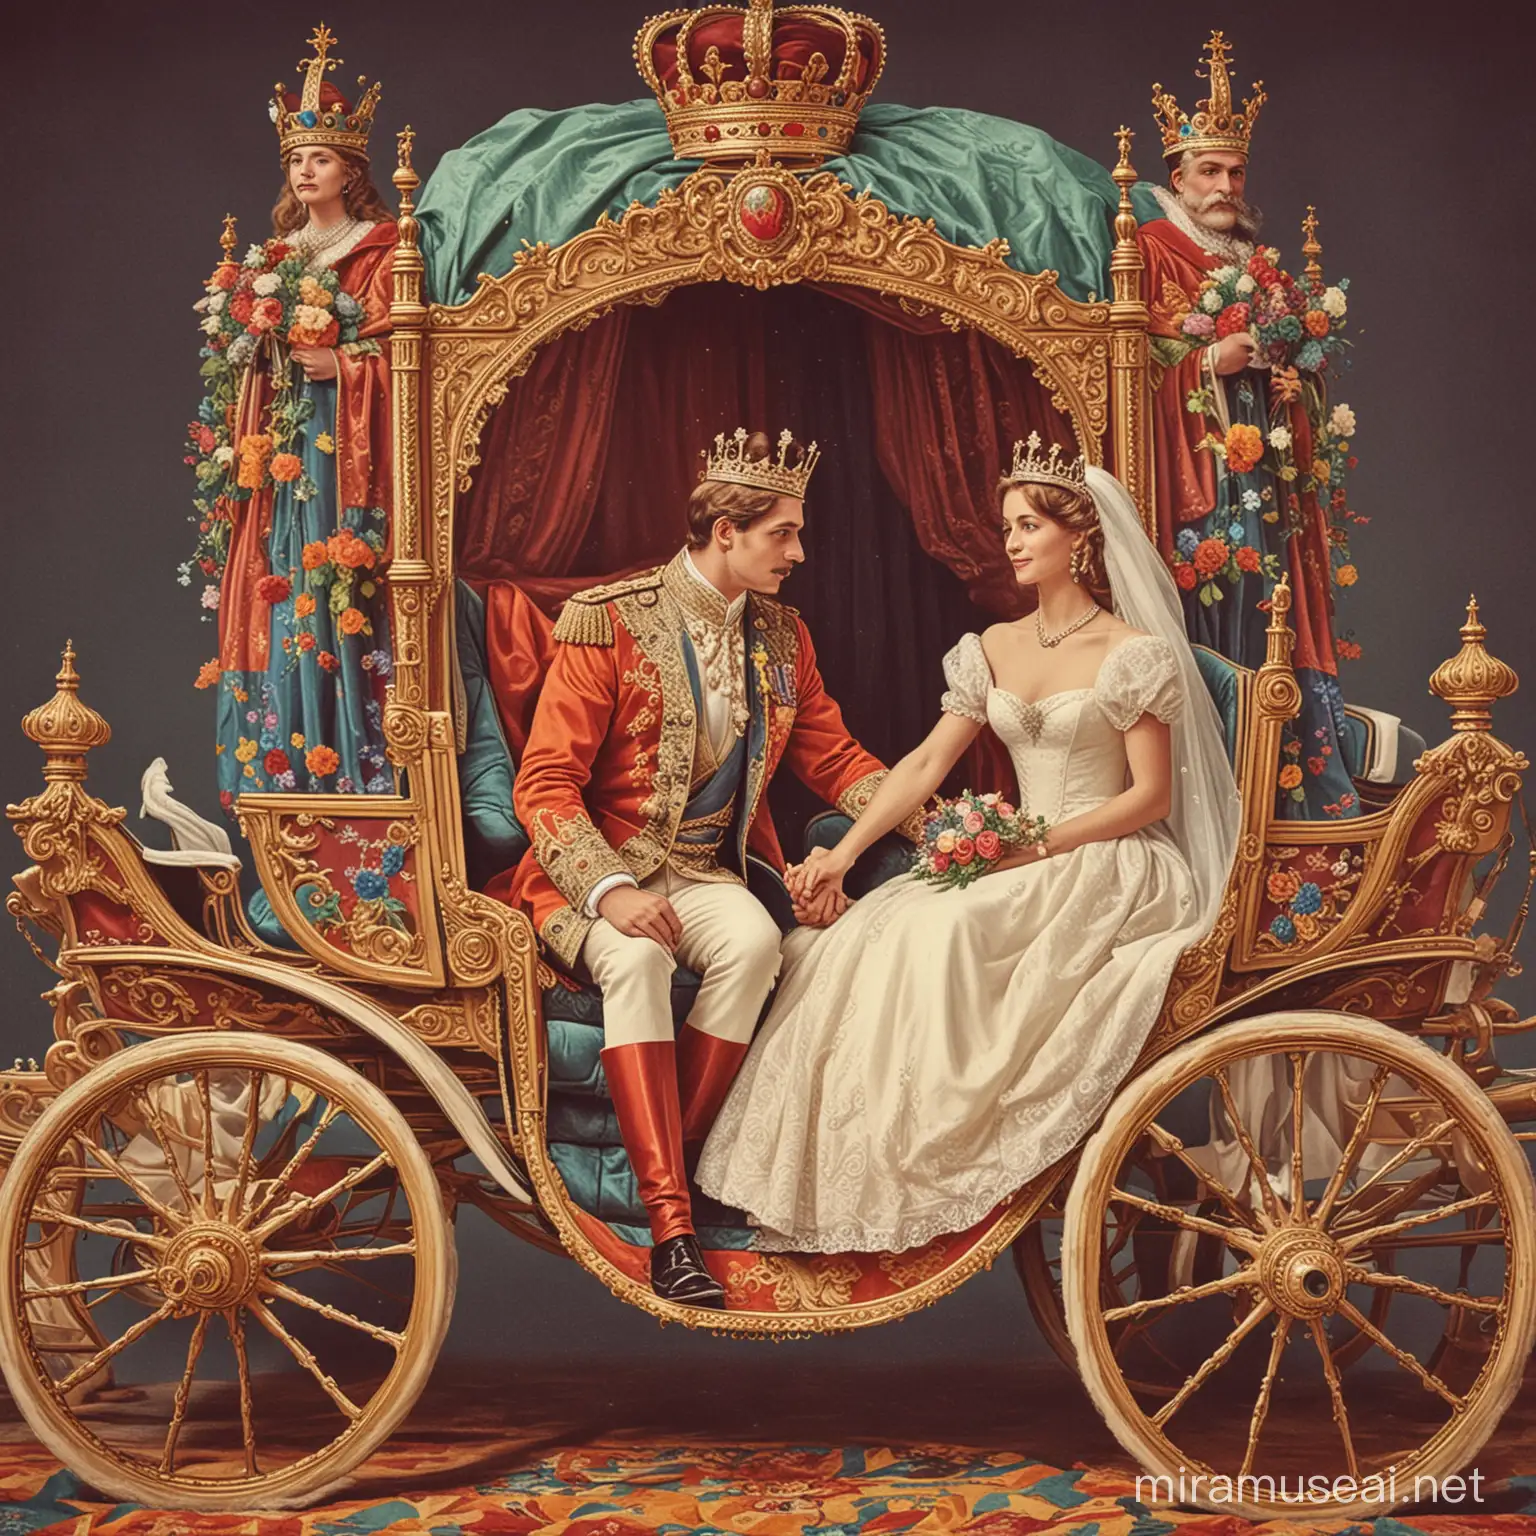 Vintage Poster Royal Wedding with King and Queen in Colorful Carriage